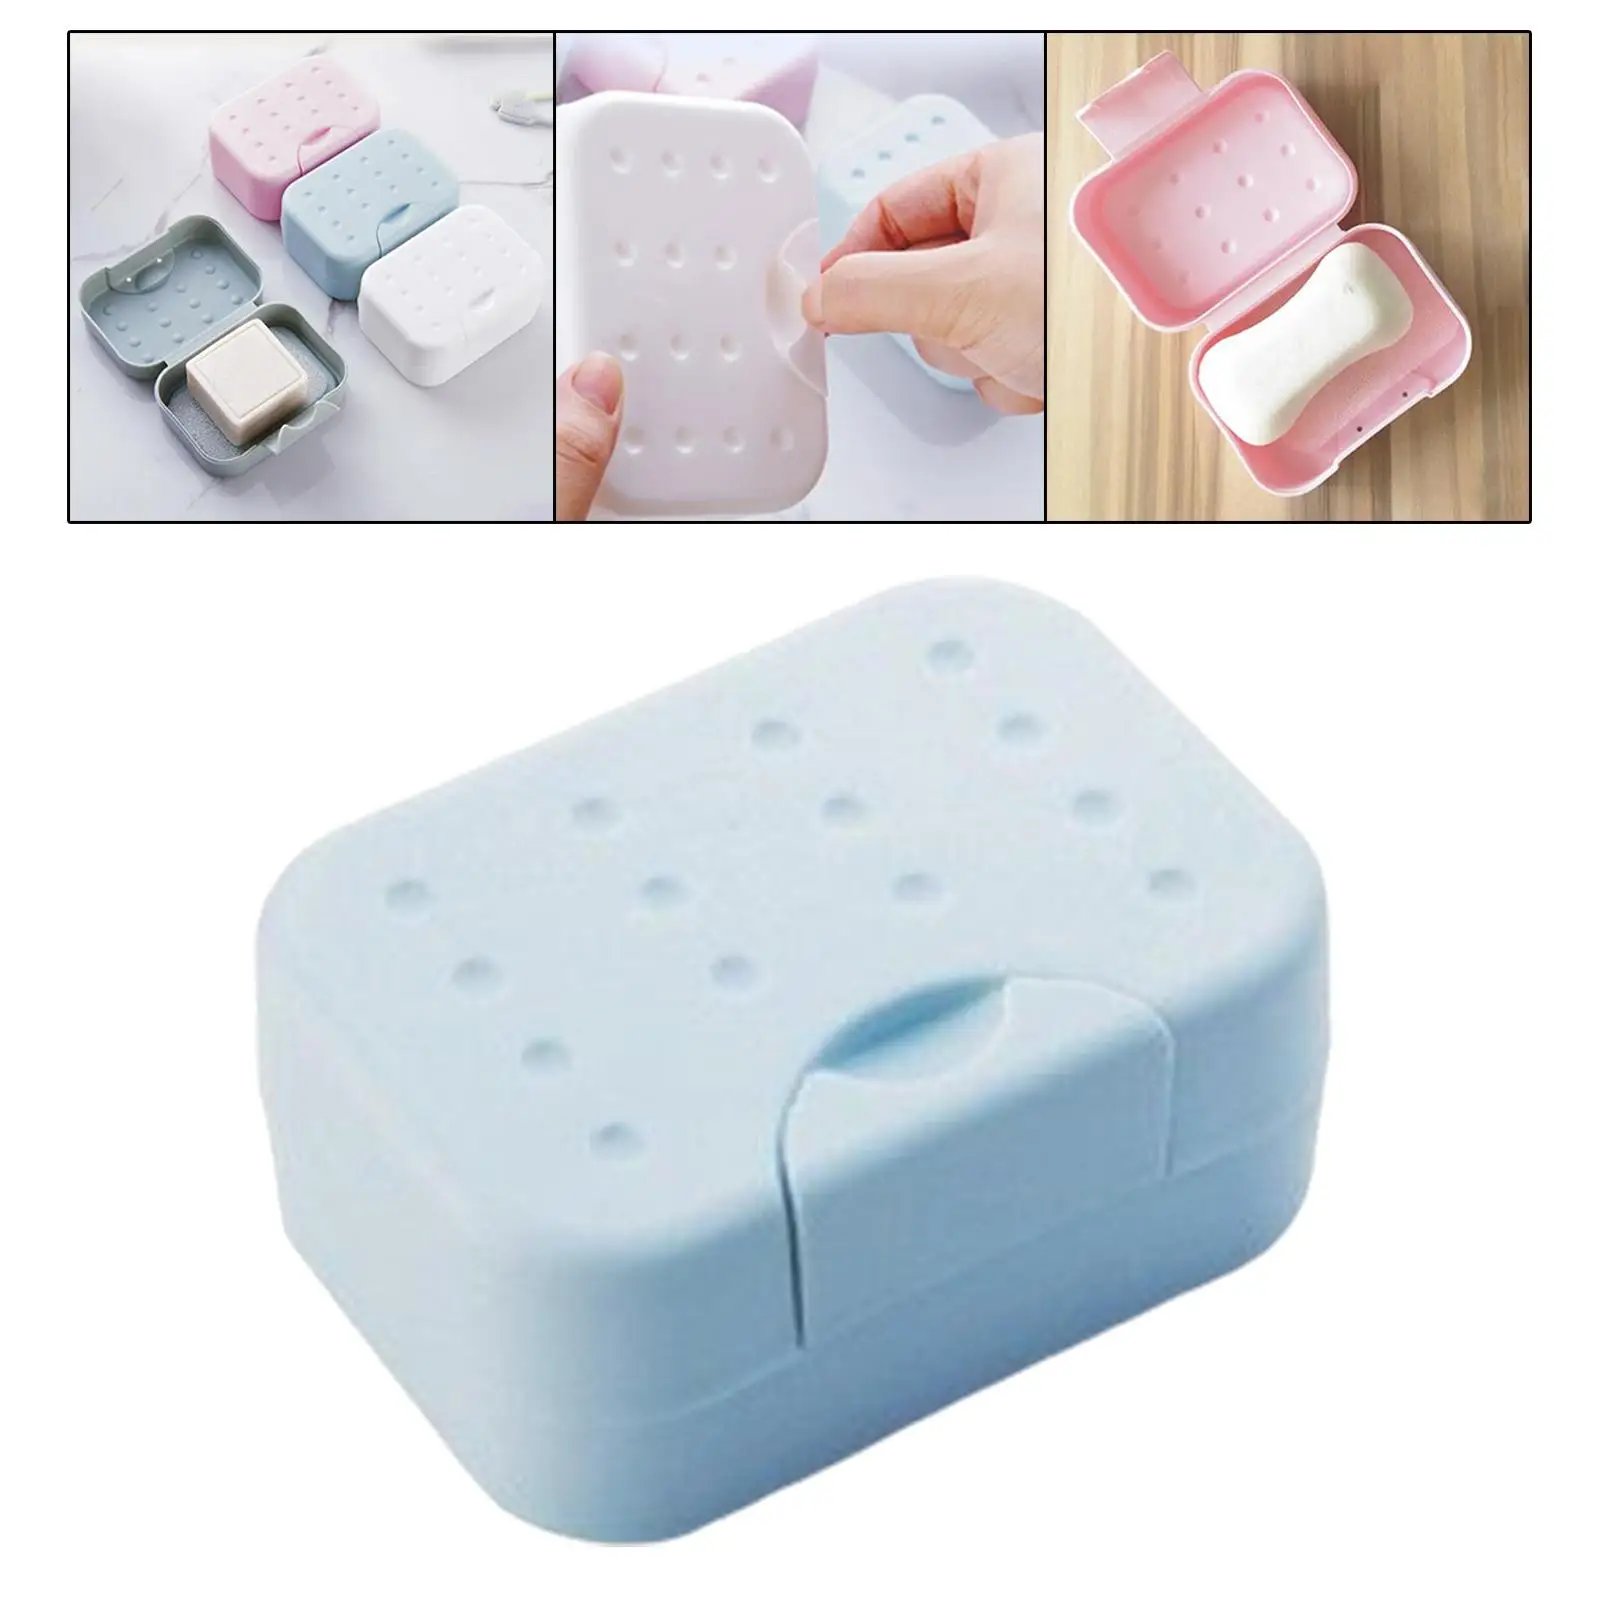 Portable Travel Soap Box Dish Case Container Soap Bar Holder for Gym School Strong Sealing with Lid Leakproof